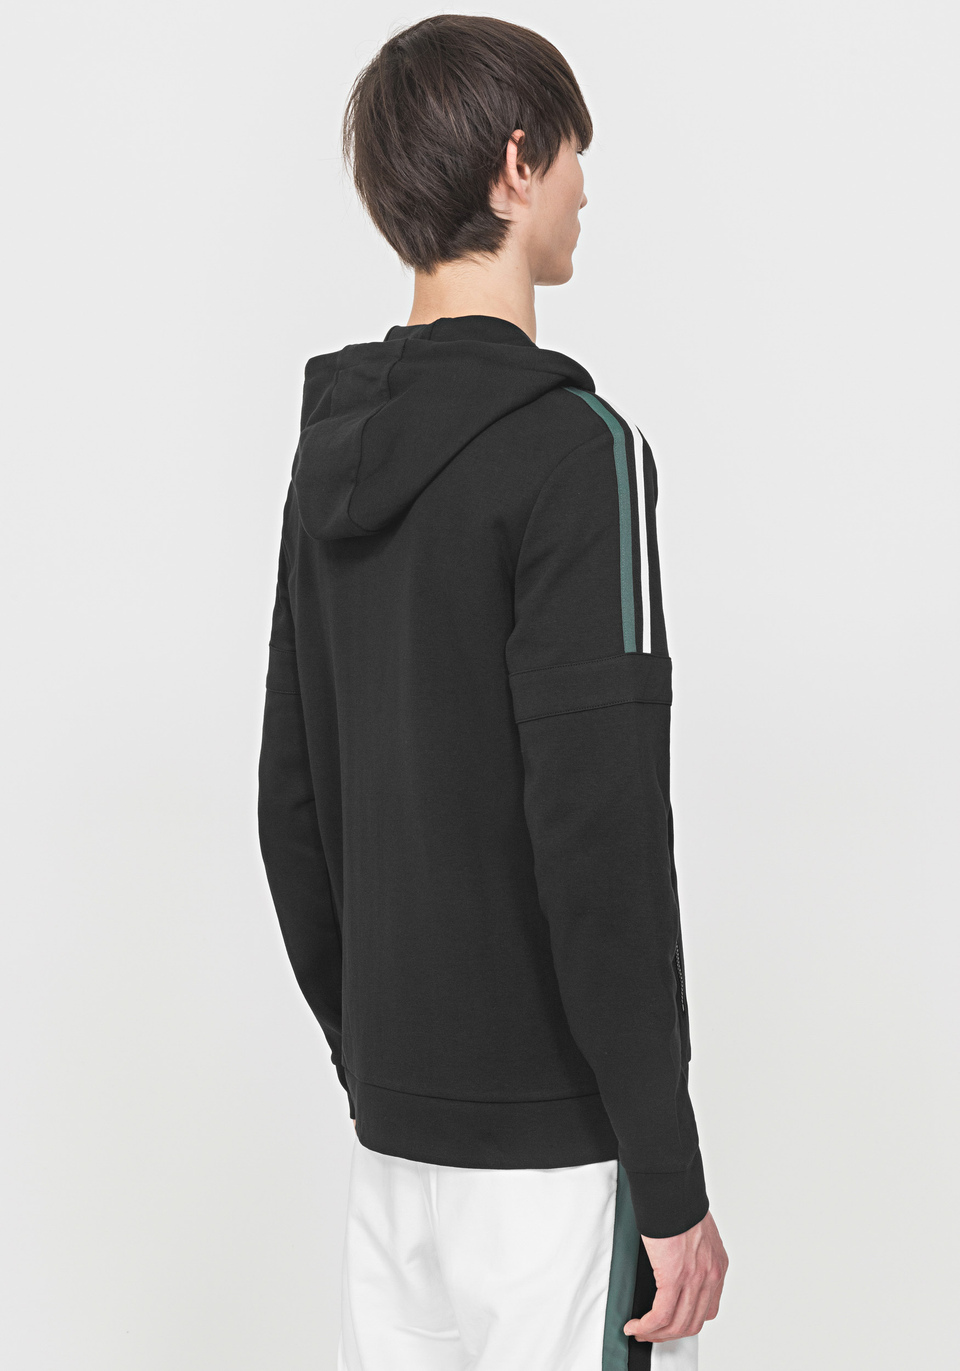 SWEATSHIRT IN COTTON JERSEY WITH TWO-COLOUR TAPE ON SHOULDERS - Antony Morato Online Shop